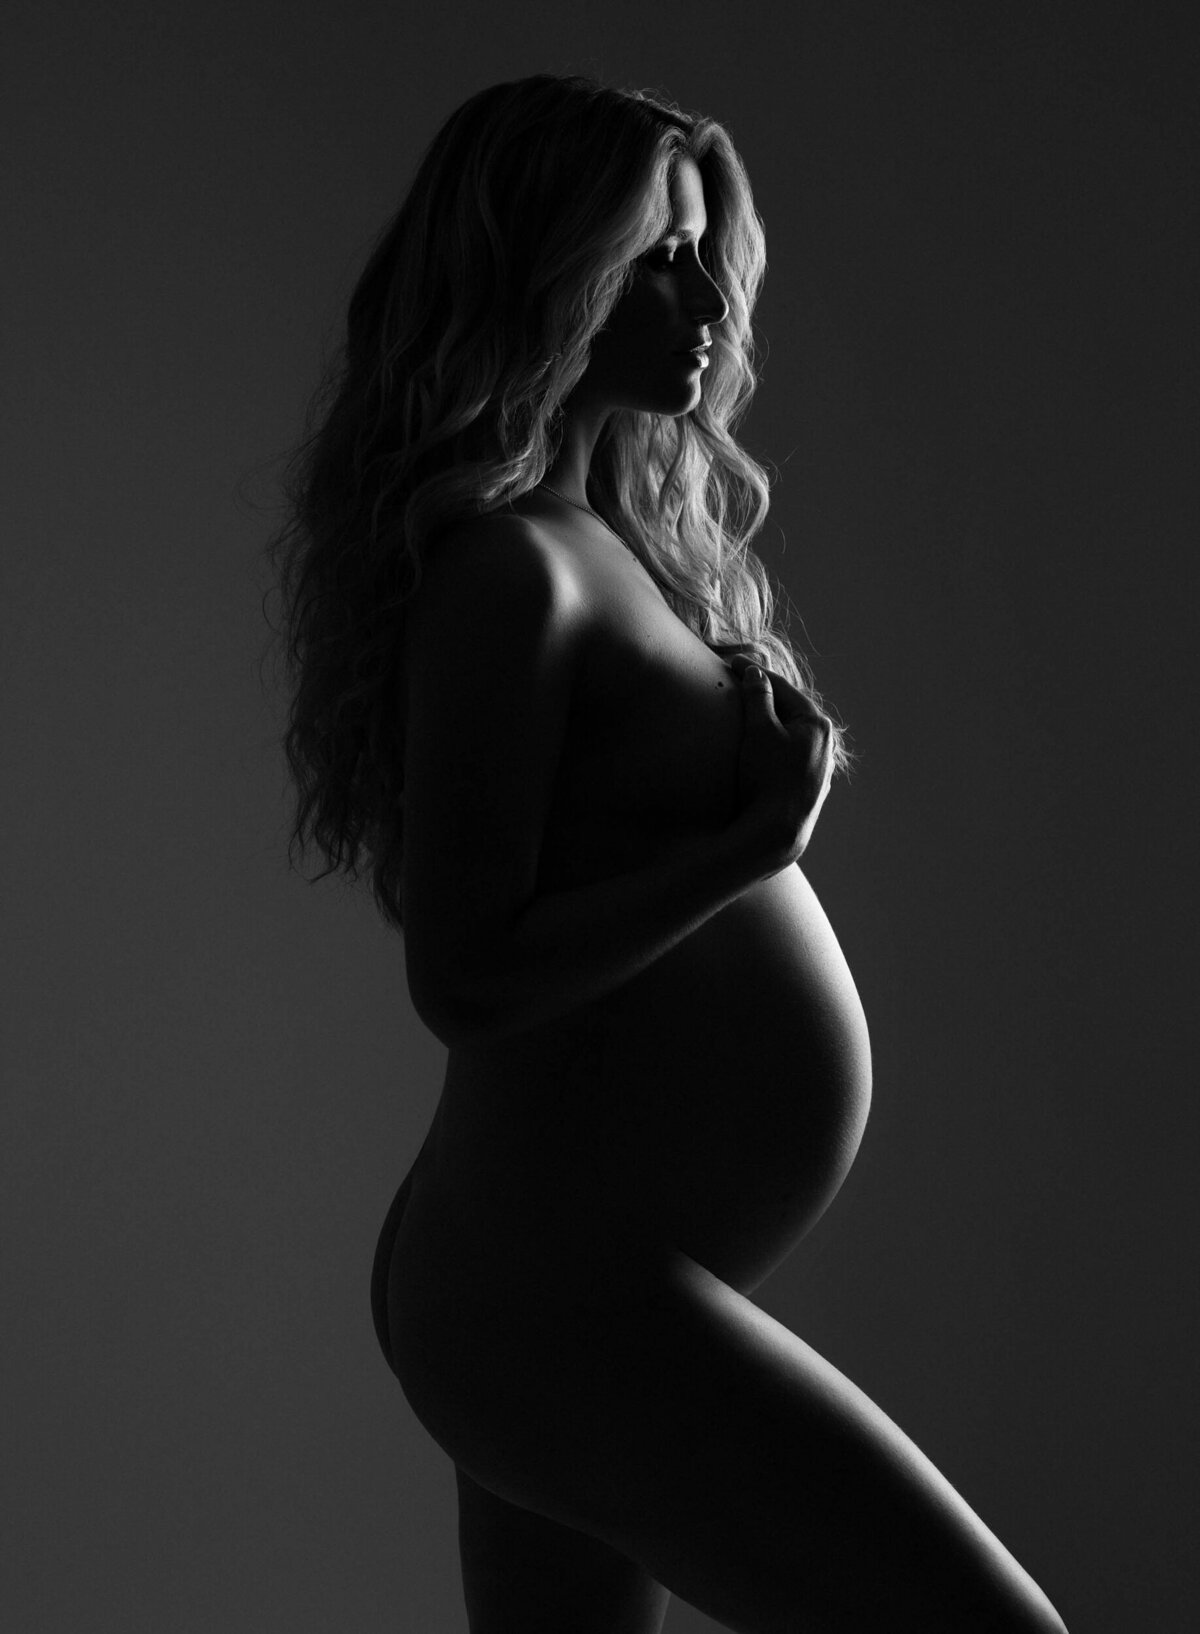 Artistic Lighting for Maternity Photography Course by Lola Melani-4